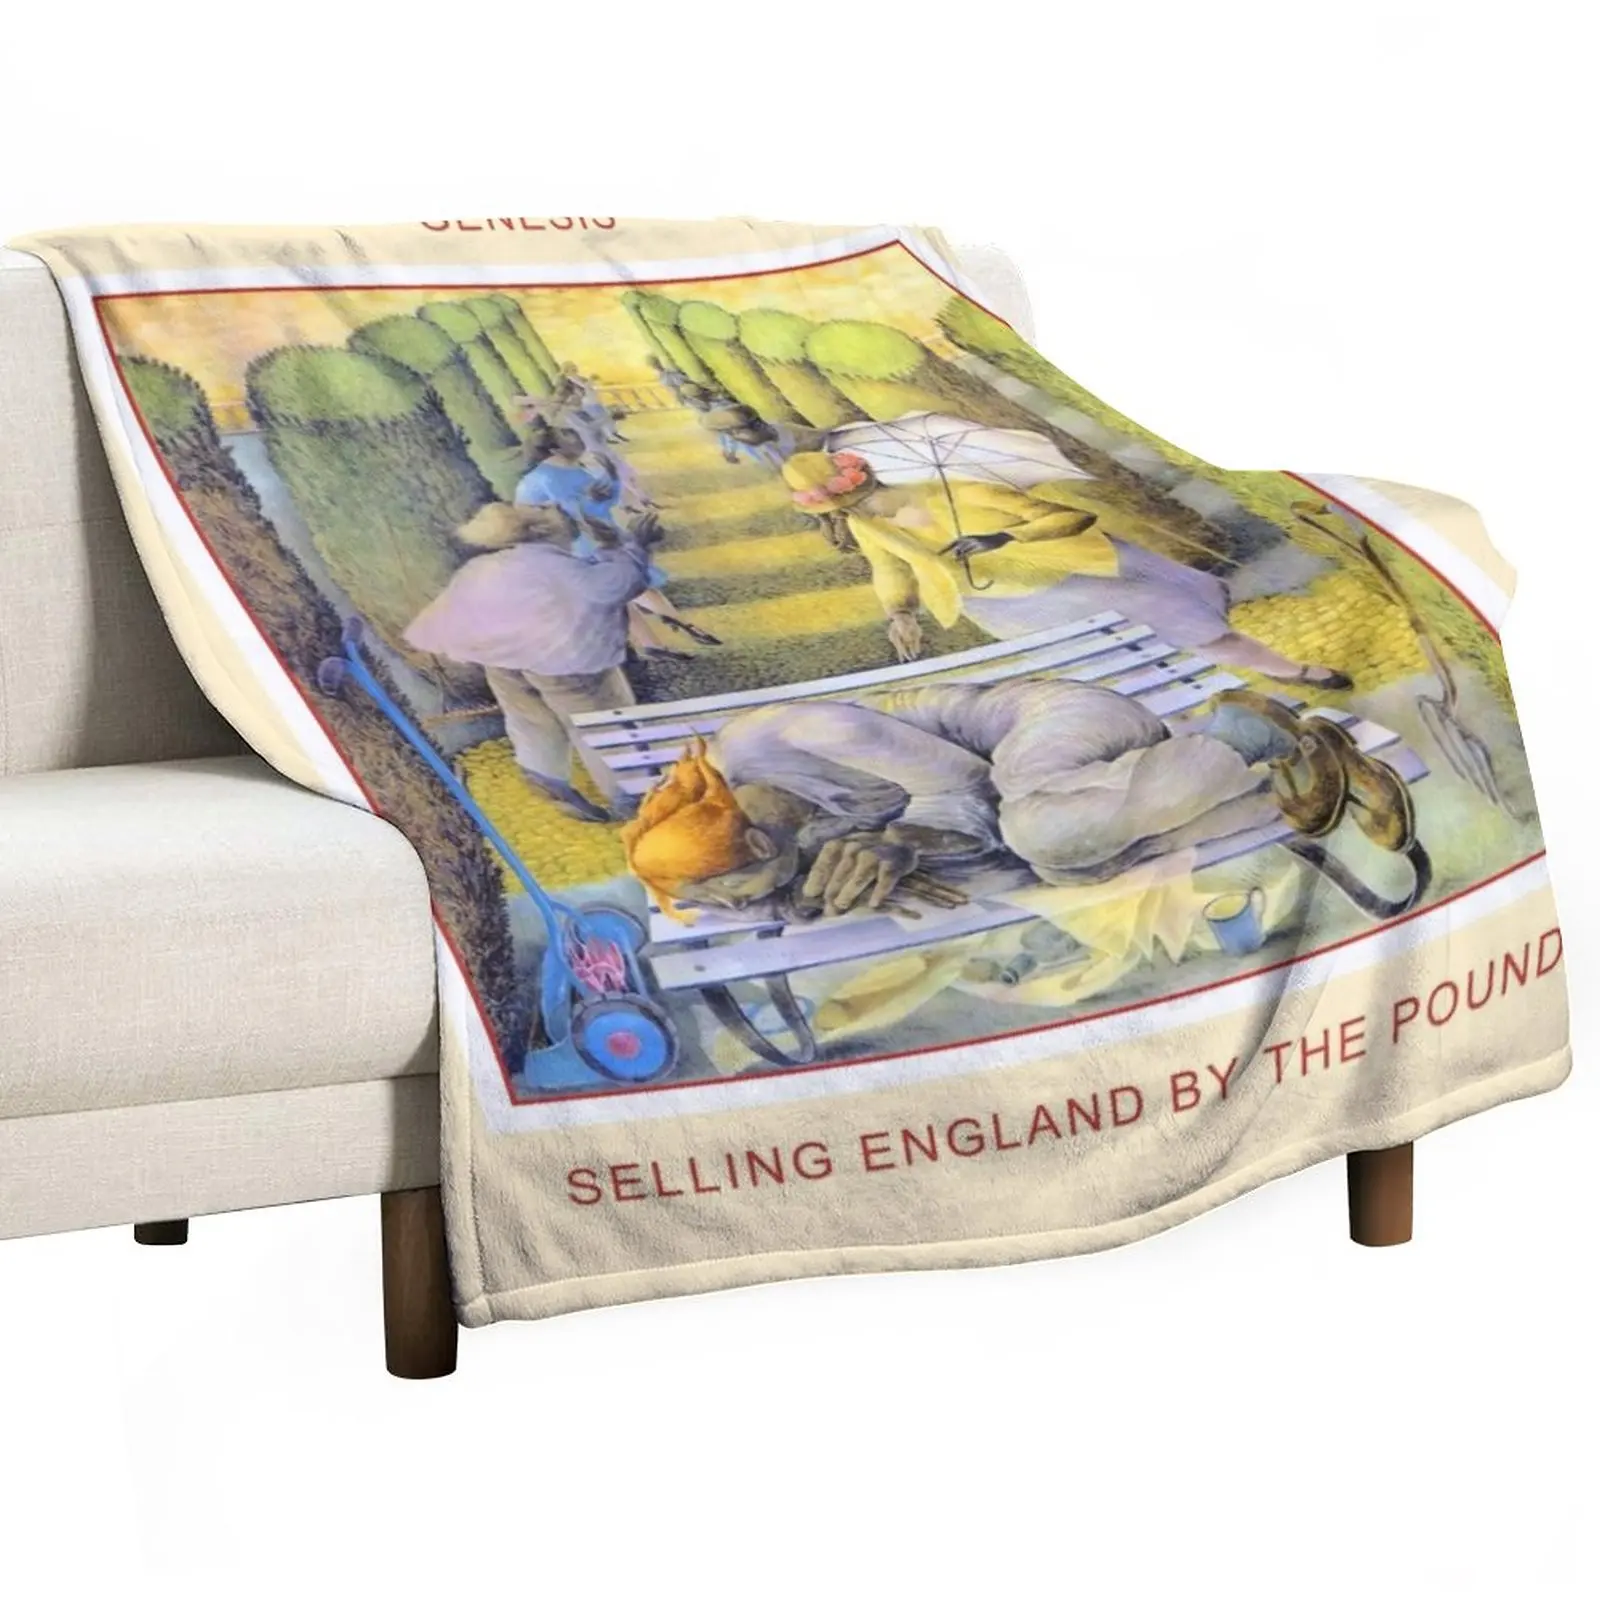 

Selling England By the Pound (HQ) Throw Blanket Thin Blanket cosplay anime Designer Blankets valentine gift ideas